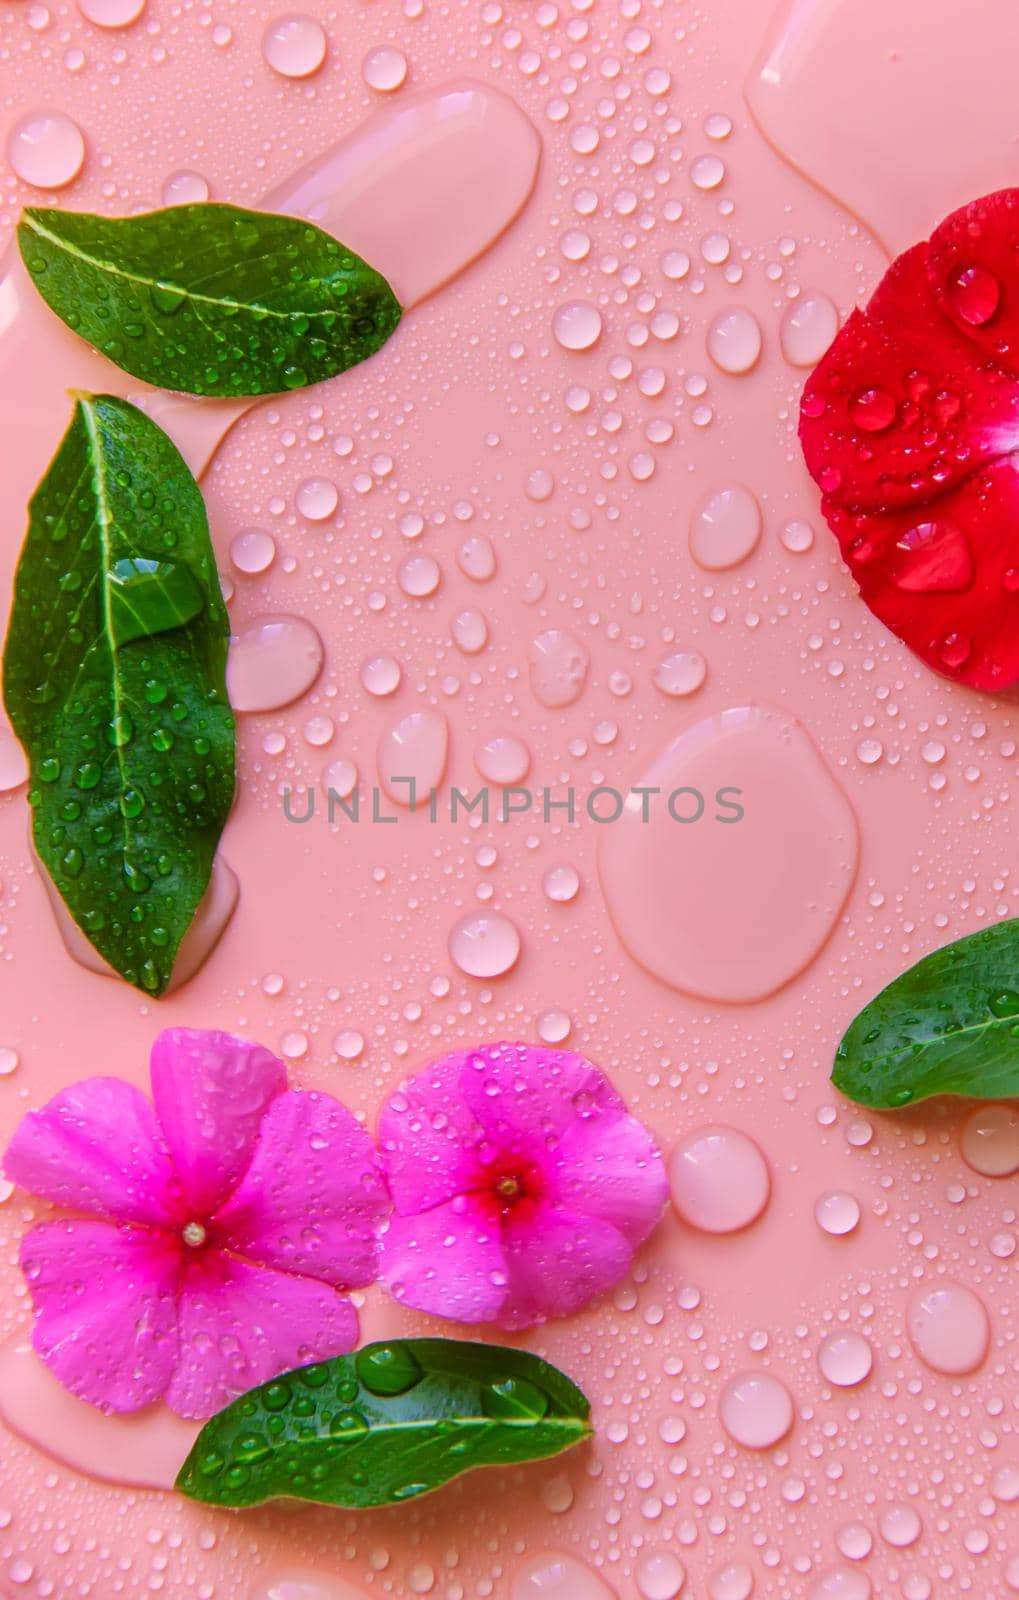 Background with water drops and flowers. Selective focus. by yanadjana